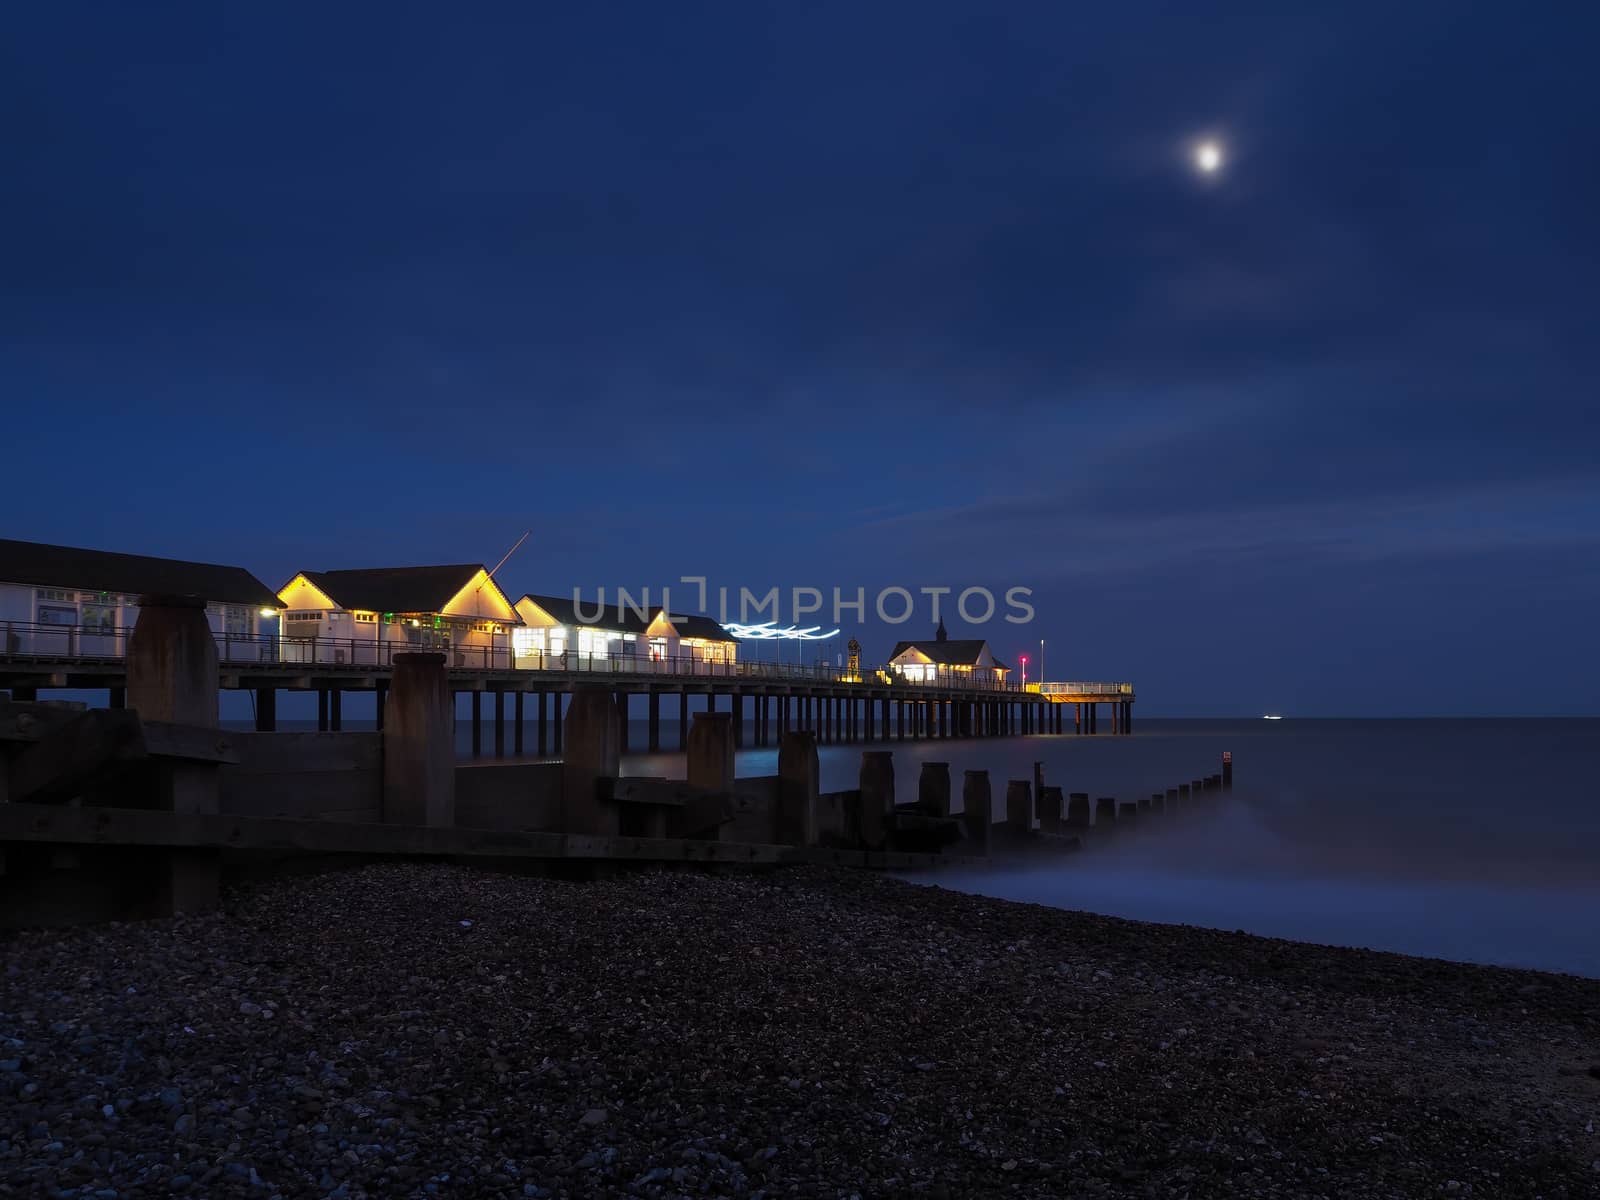 Southwold Pier lit up at night with wooden groyne, bright moon and ship, Suffolk by PhilHarland